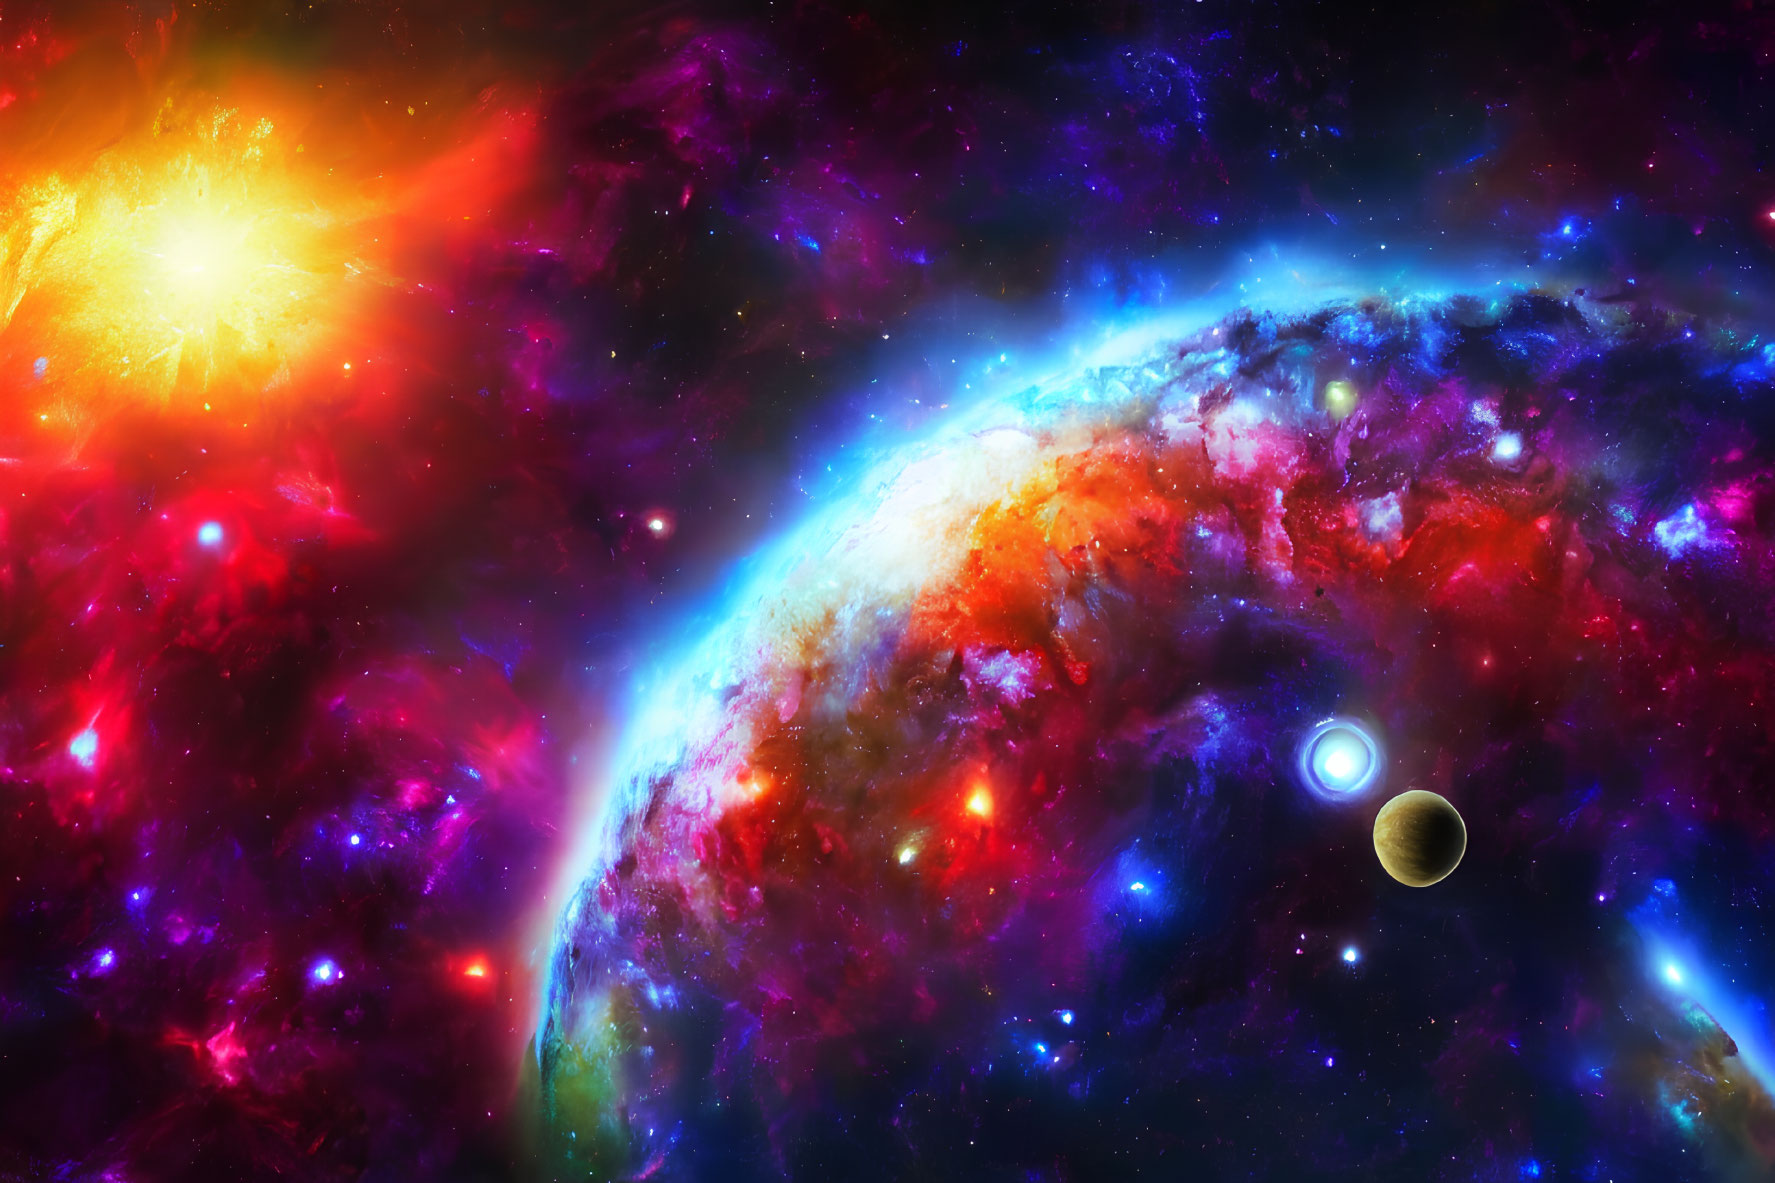 Colorful cosmic scene featuring star, nebulae, galaxy, and planets